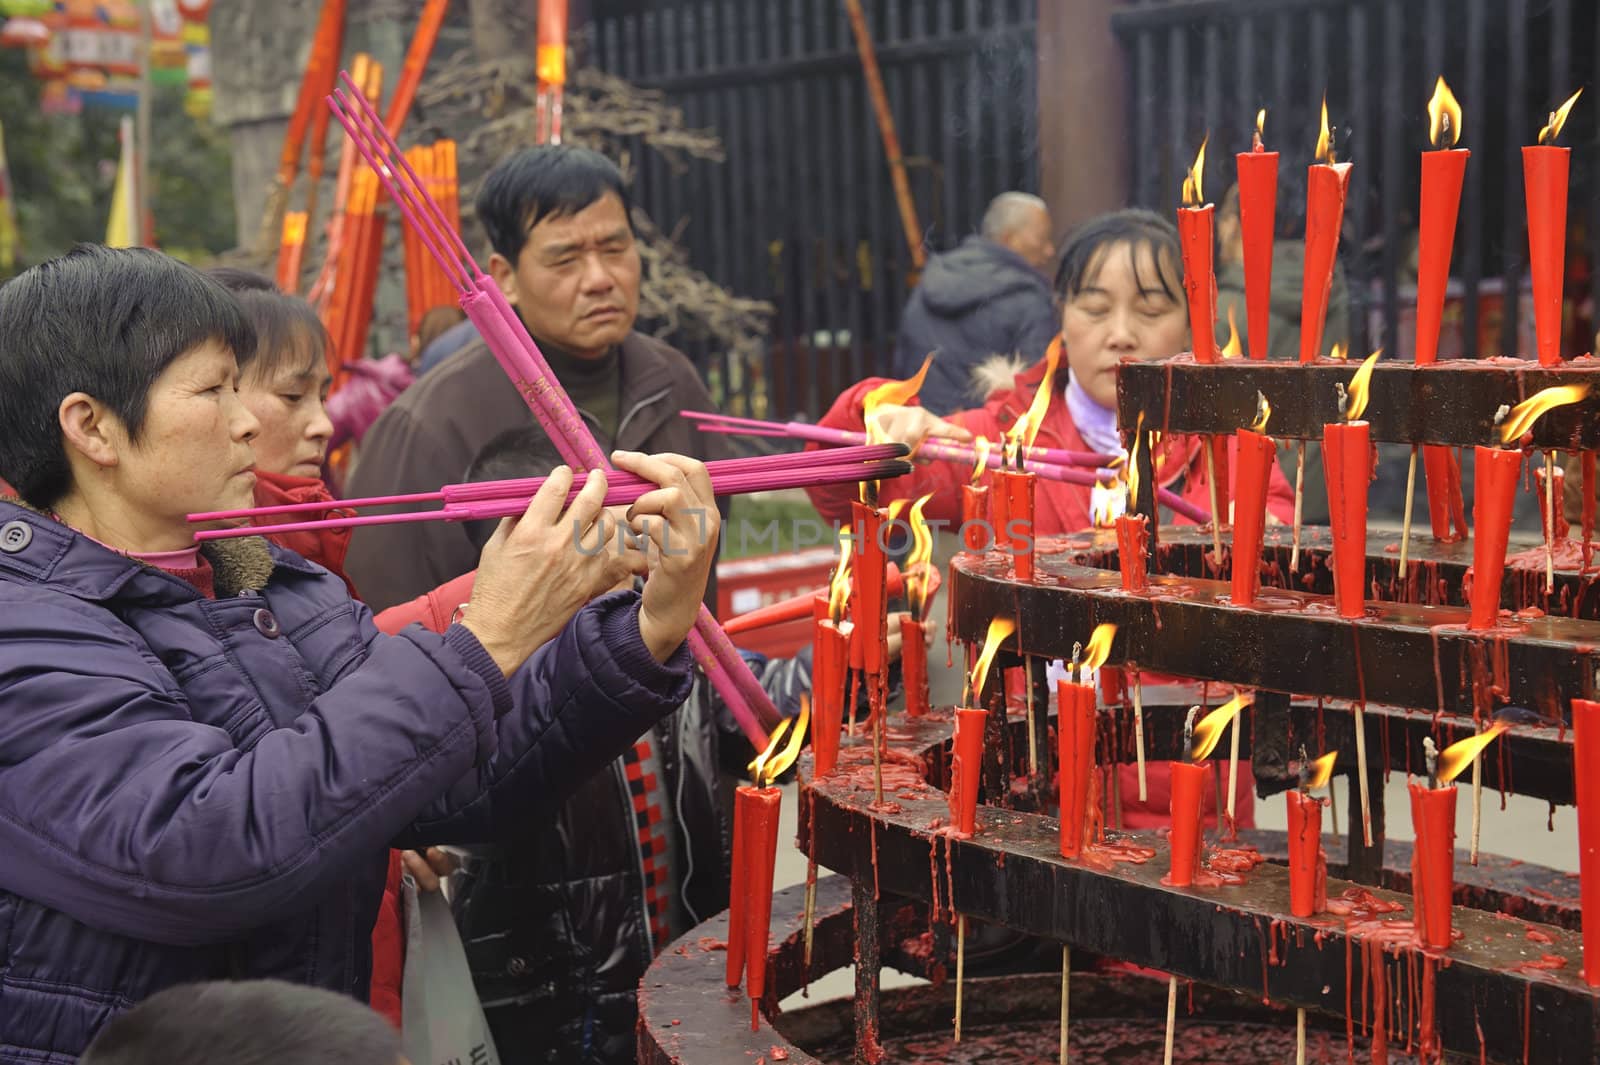 CHENGDU - FEB 5: People burning incense upon the incense altar in temple during chinese new year on Feb 5, 2011 in Chengdu, China.Many people want to relieve their worries and difficulties by burning incense and praying to Buddha during festivals.It's part of the important traditional custom in China.